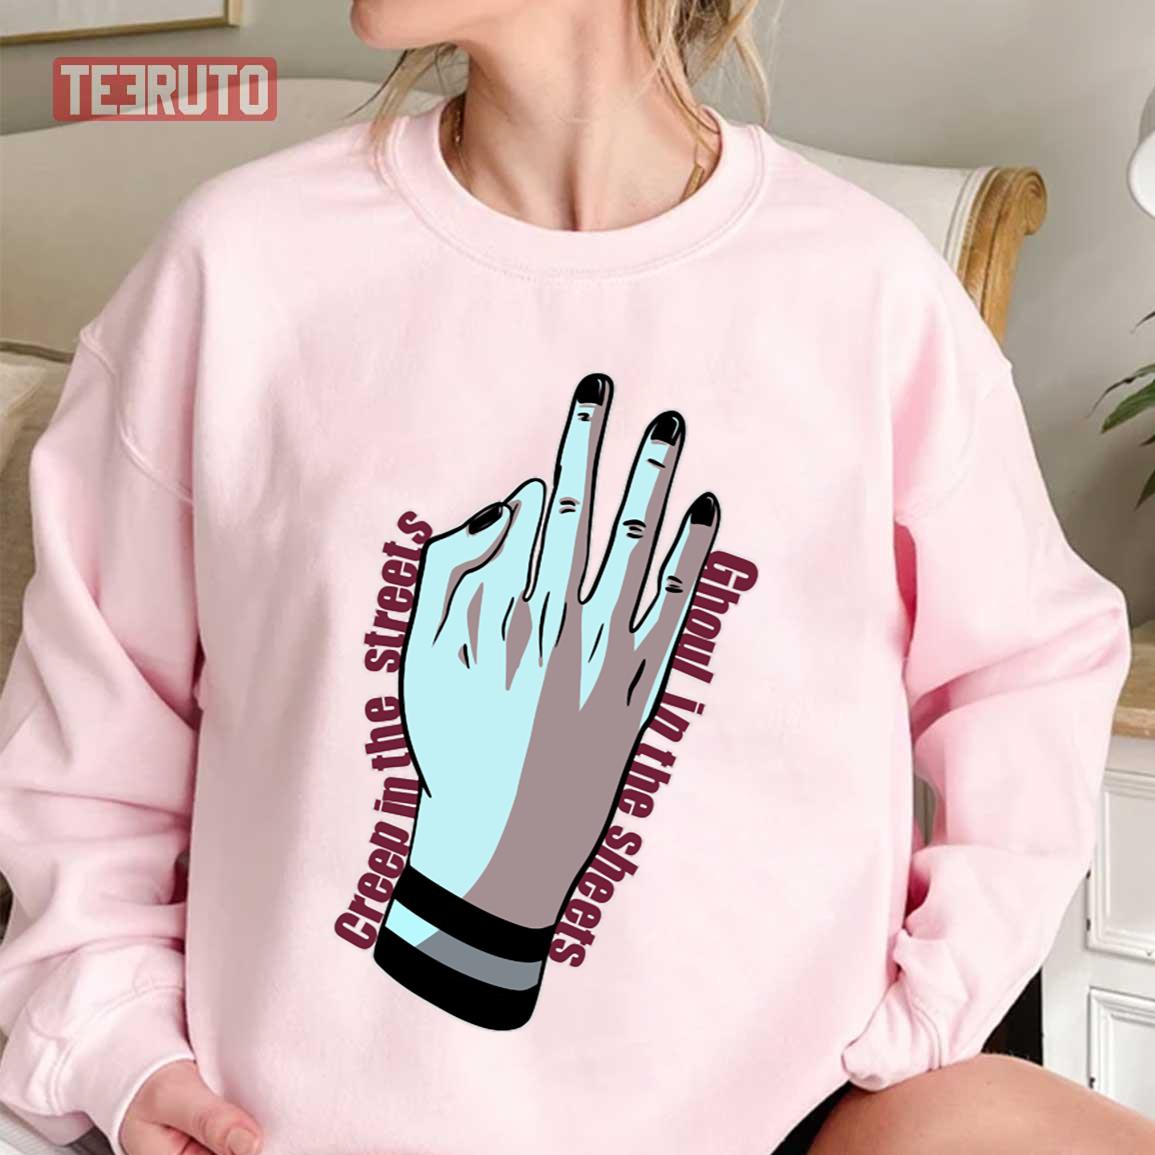 “ Creep In The Streets Ghoul In The Sheets” Tokyo Ghoul Anime Unisex Sweatshirt